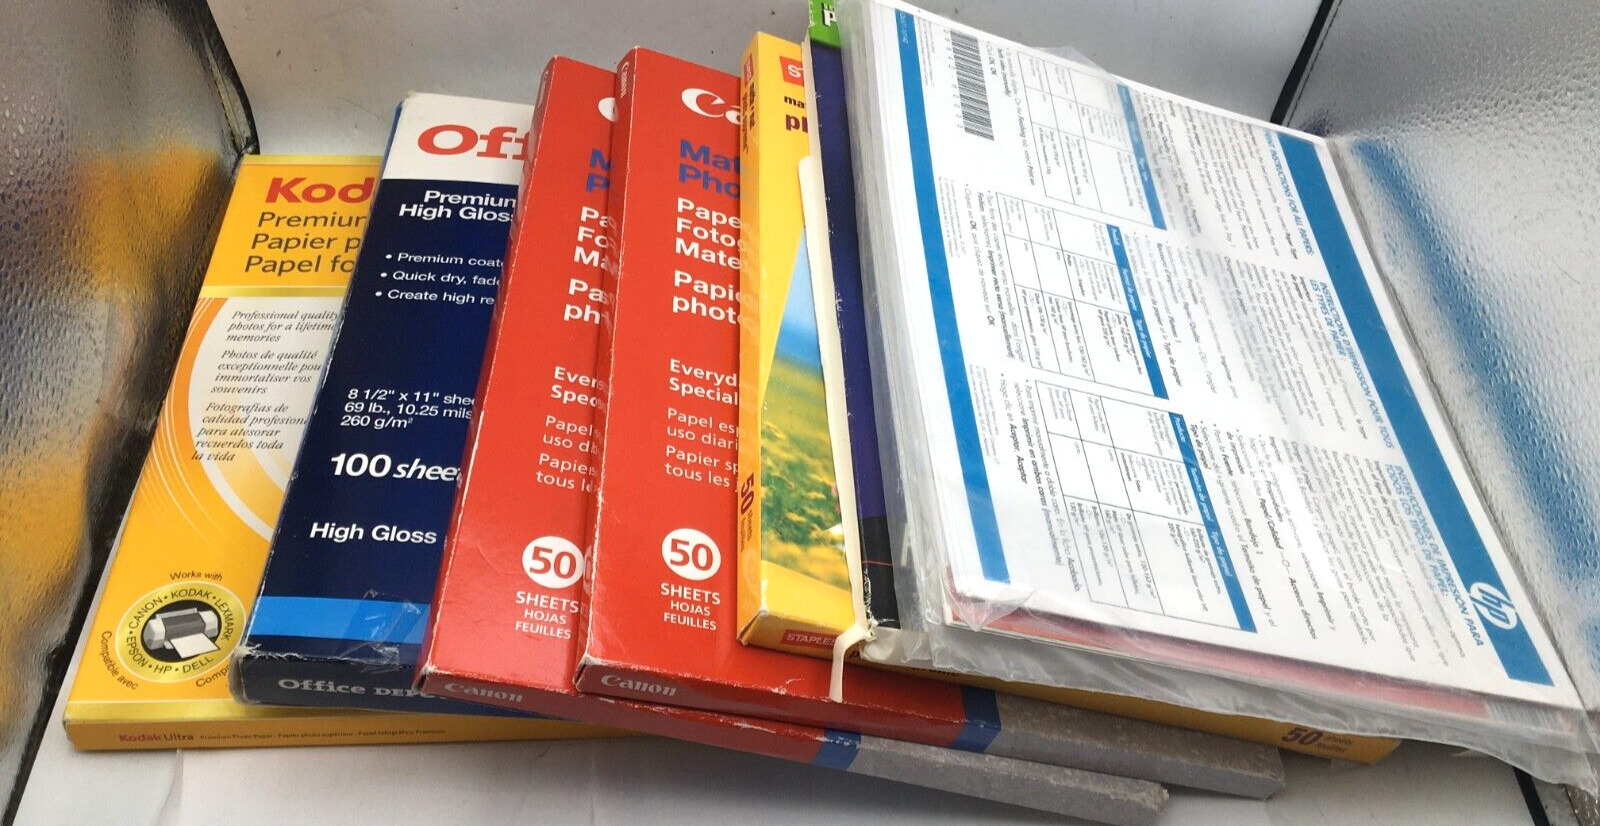 Kodak Canon HP Office Depot Staples Photo Paper Lot of 400 + Pages Glossy Matte